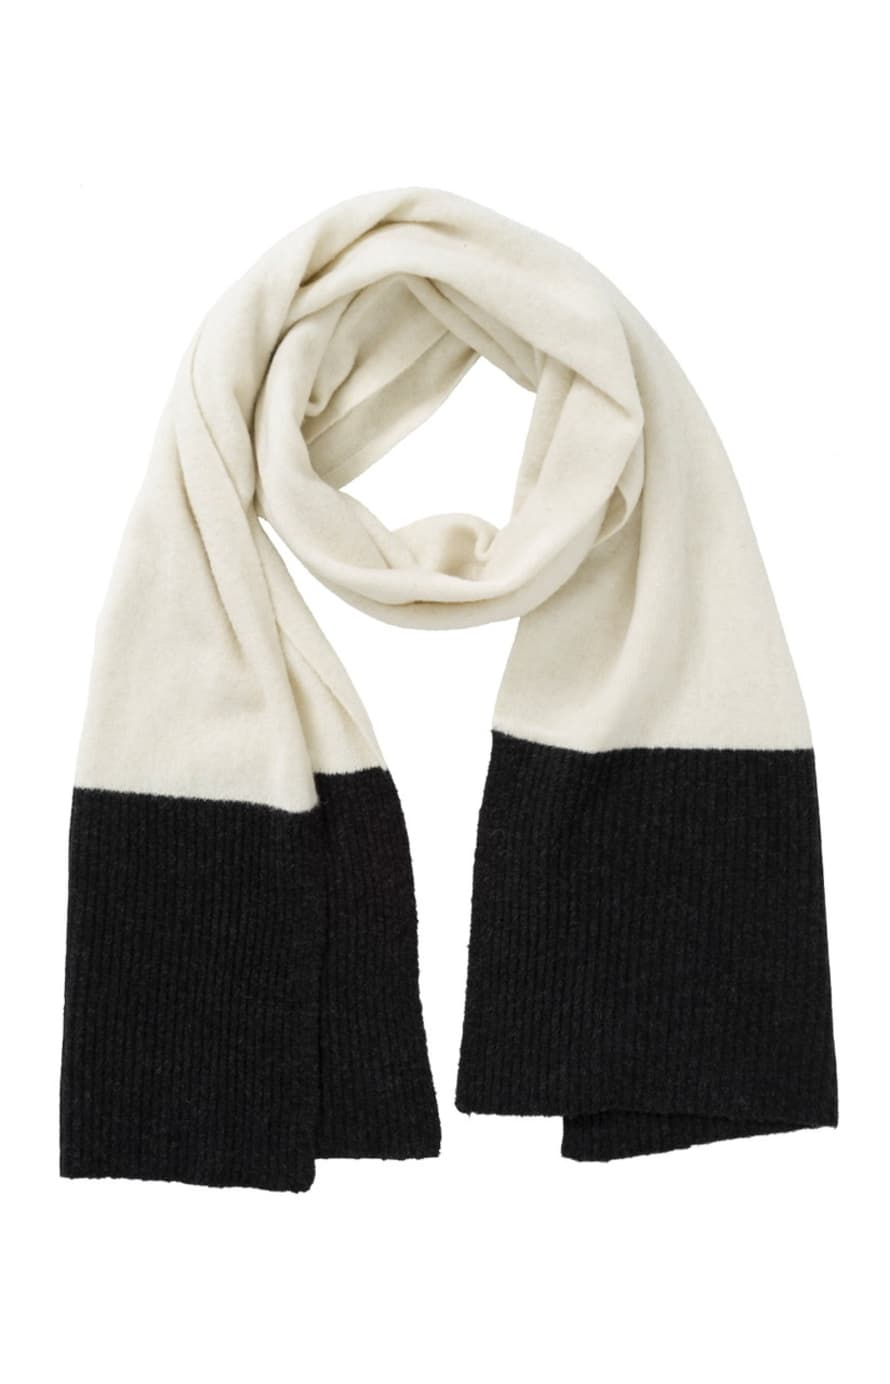 Yaya Scarf in two tones with ribbed details - Anthracite